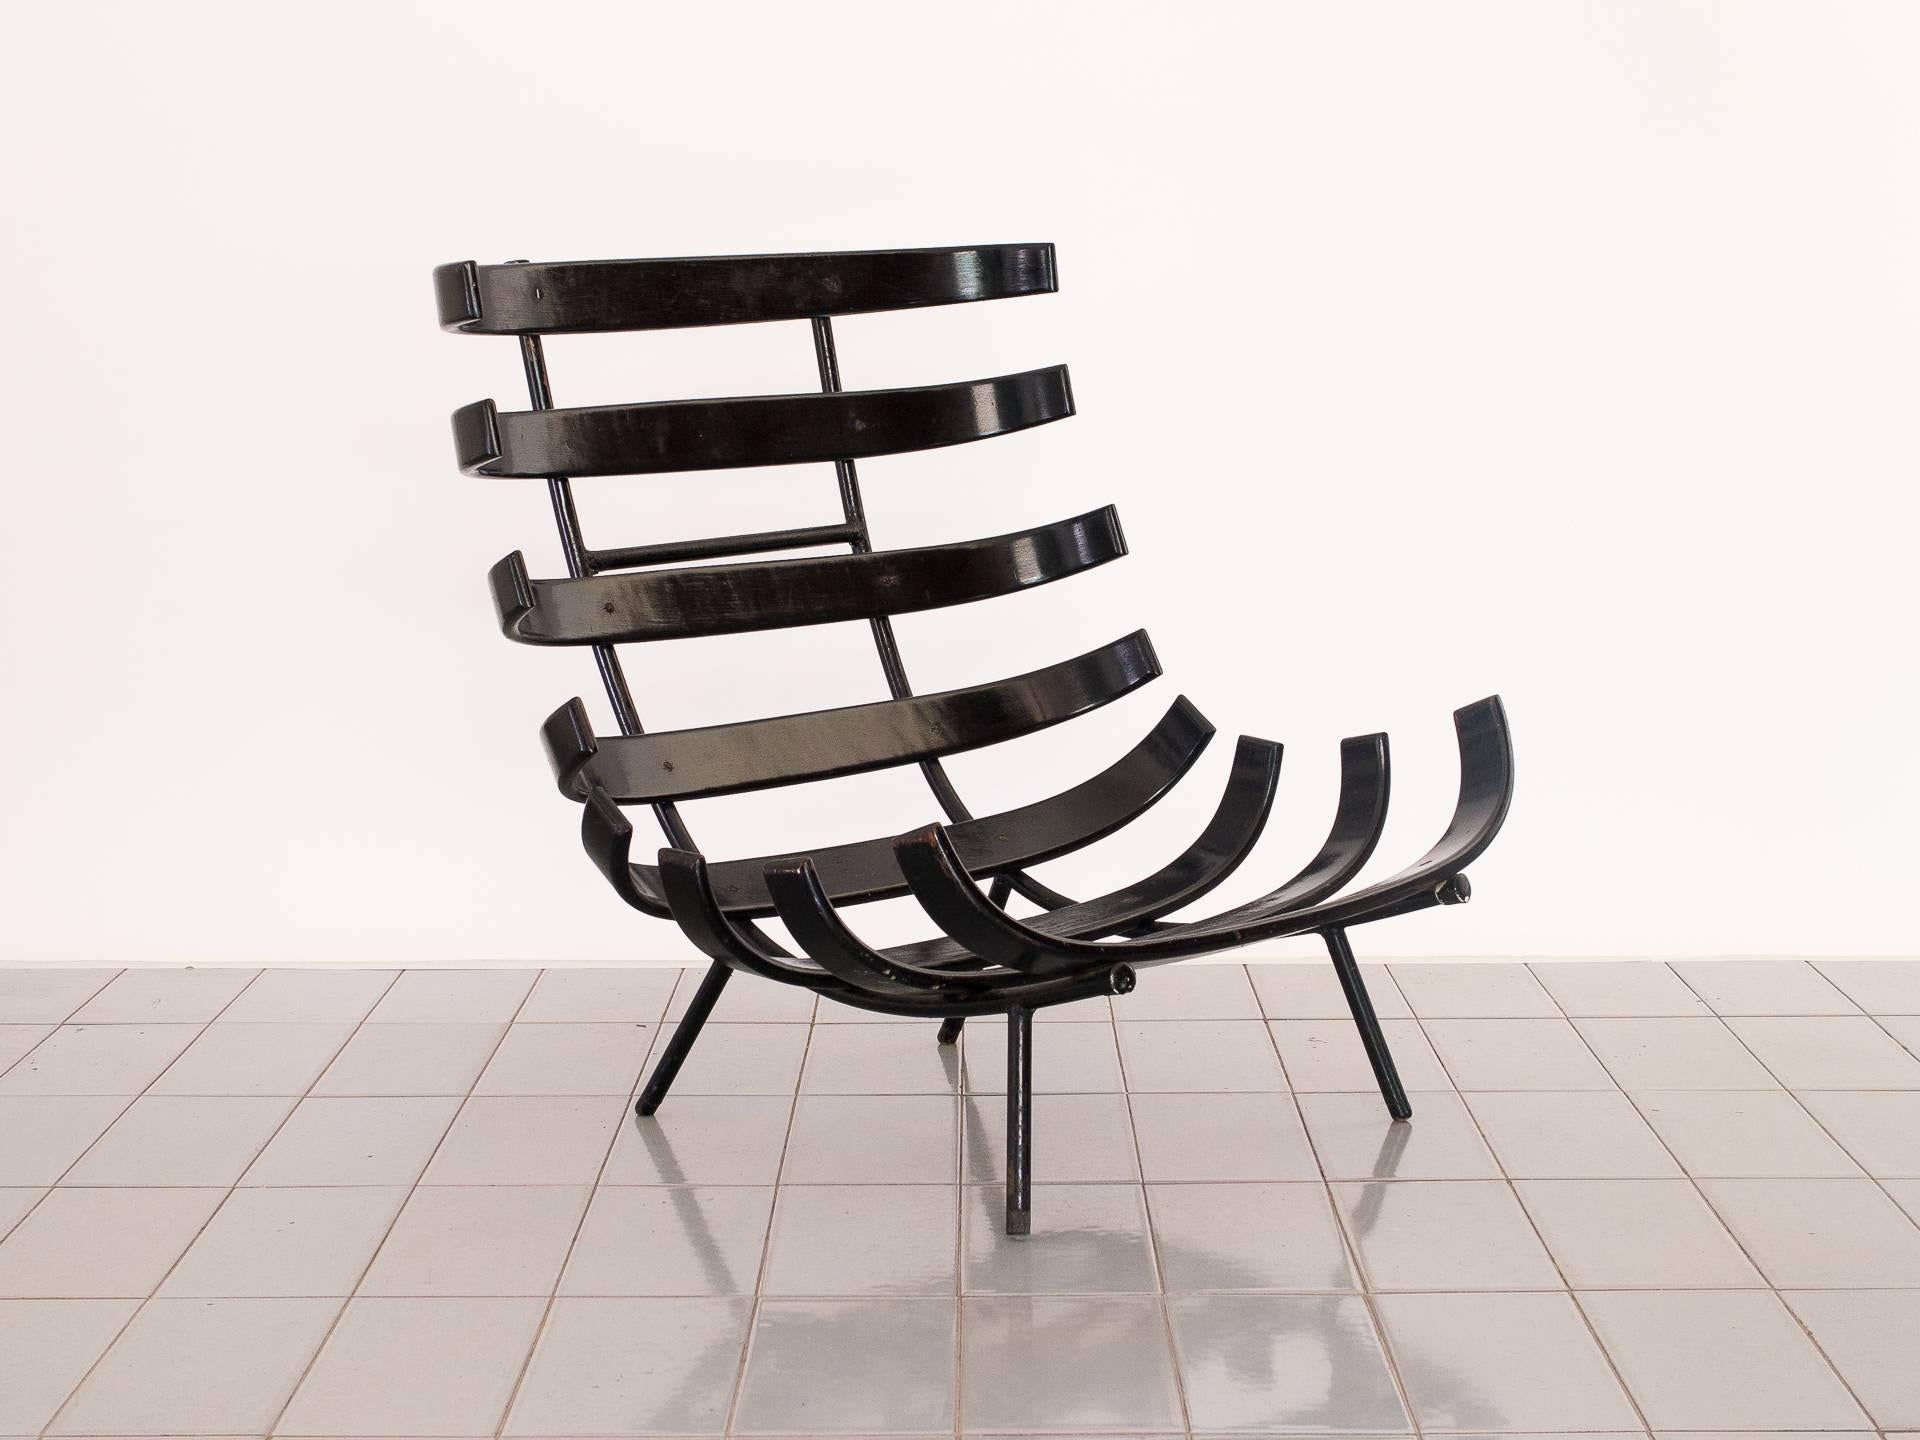 Classic design by Eisler, this chair has tubular iron structure and ebonized wood slats to form seat and back. The cushions still have the original filling, the fabric shows wear but isn't original. This chair hasn't been refinished yet to show the